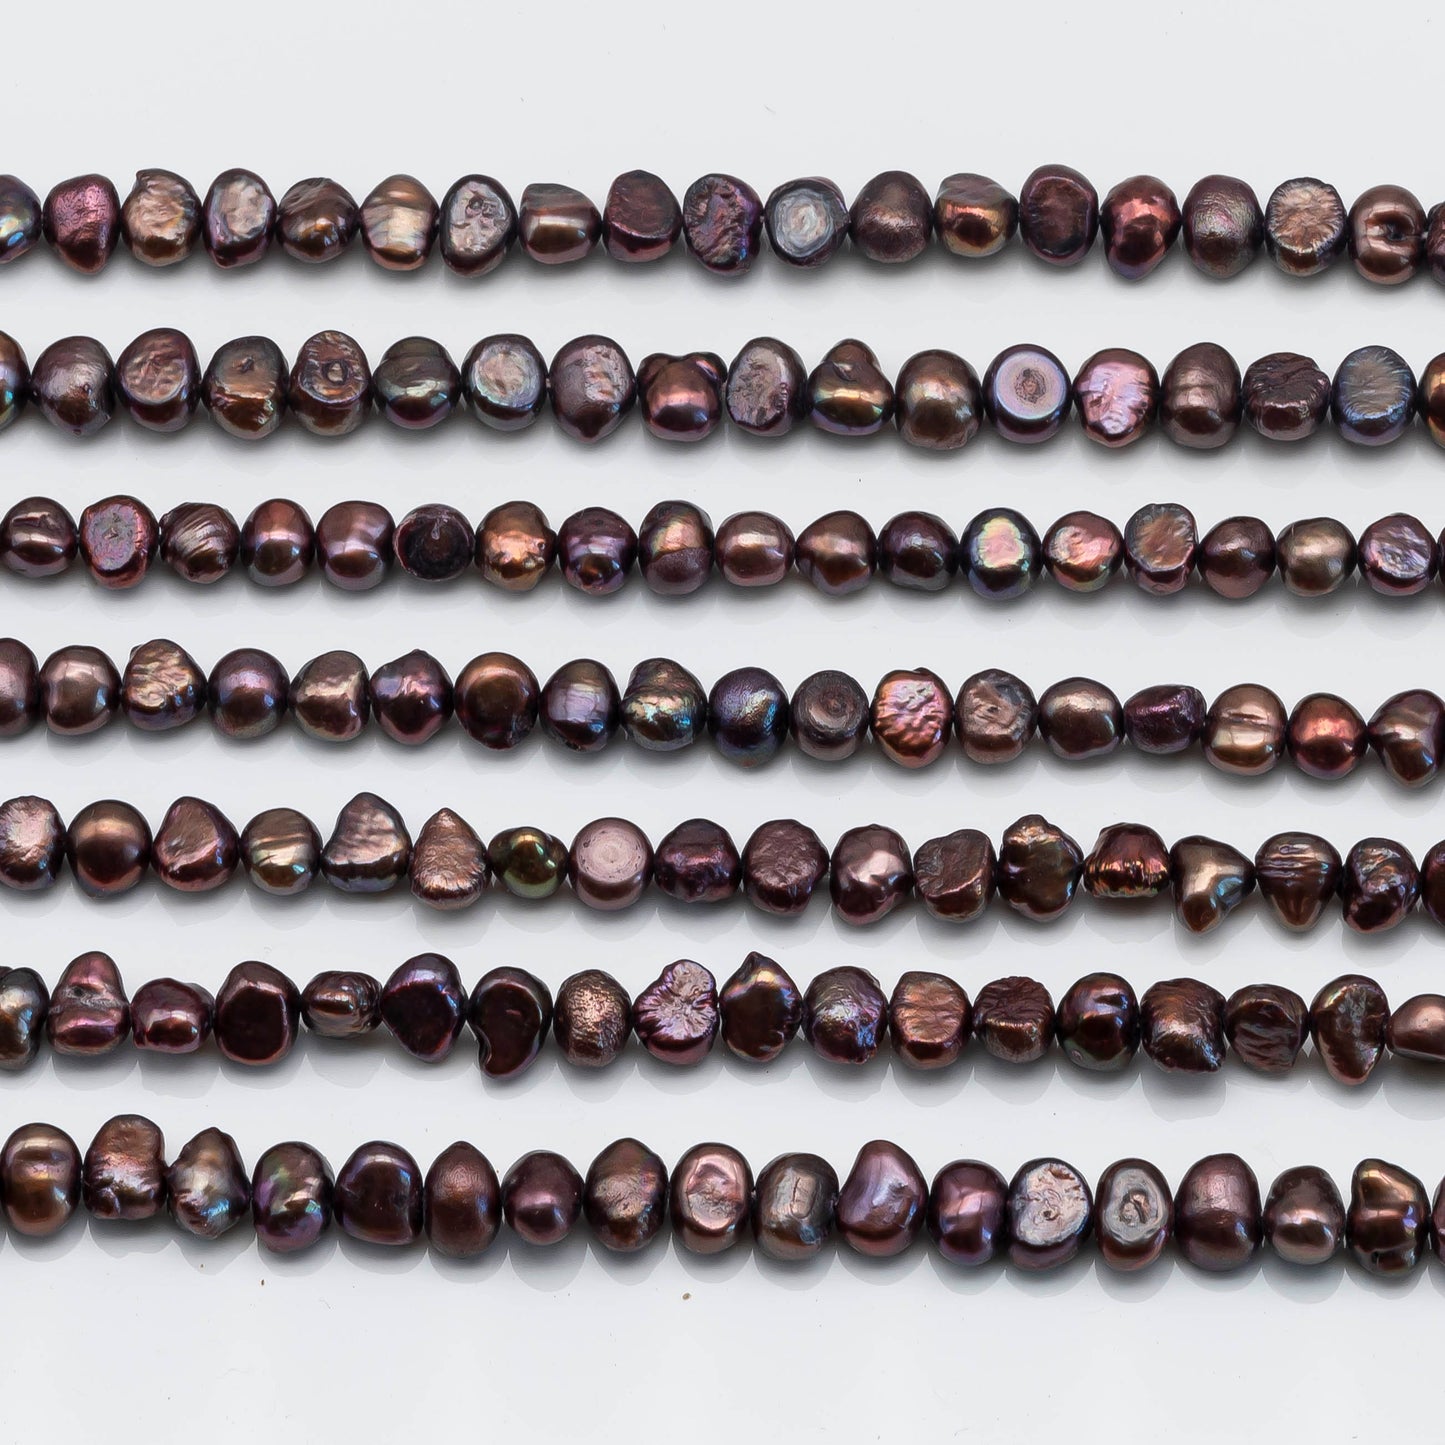 6-7mm Freshwater Pearl Center Side Drilled Bronze Color in Full Stand fro Beading, SKU # 1593FW